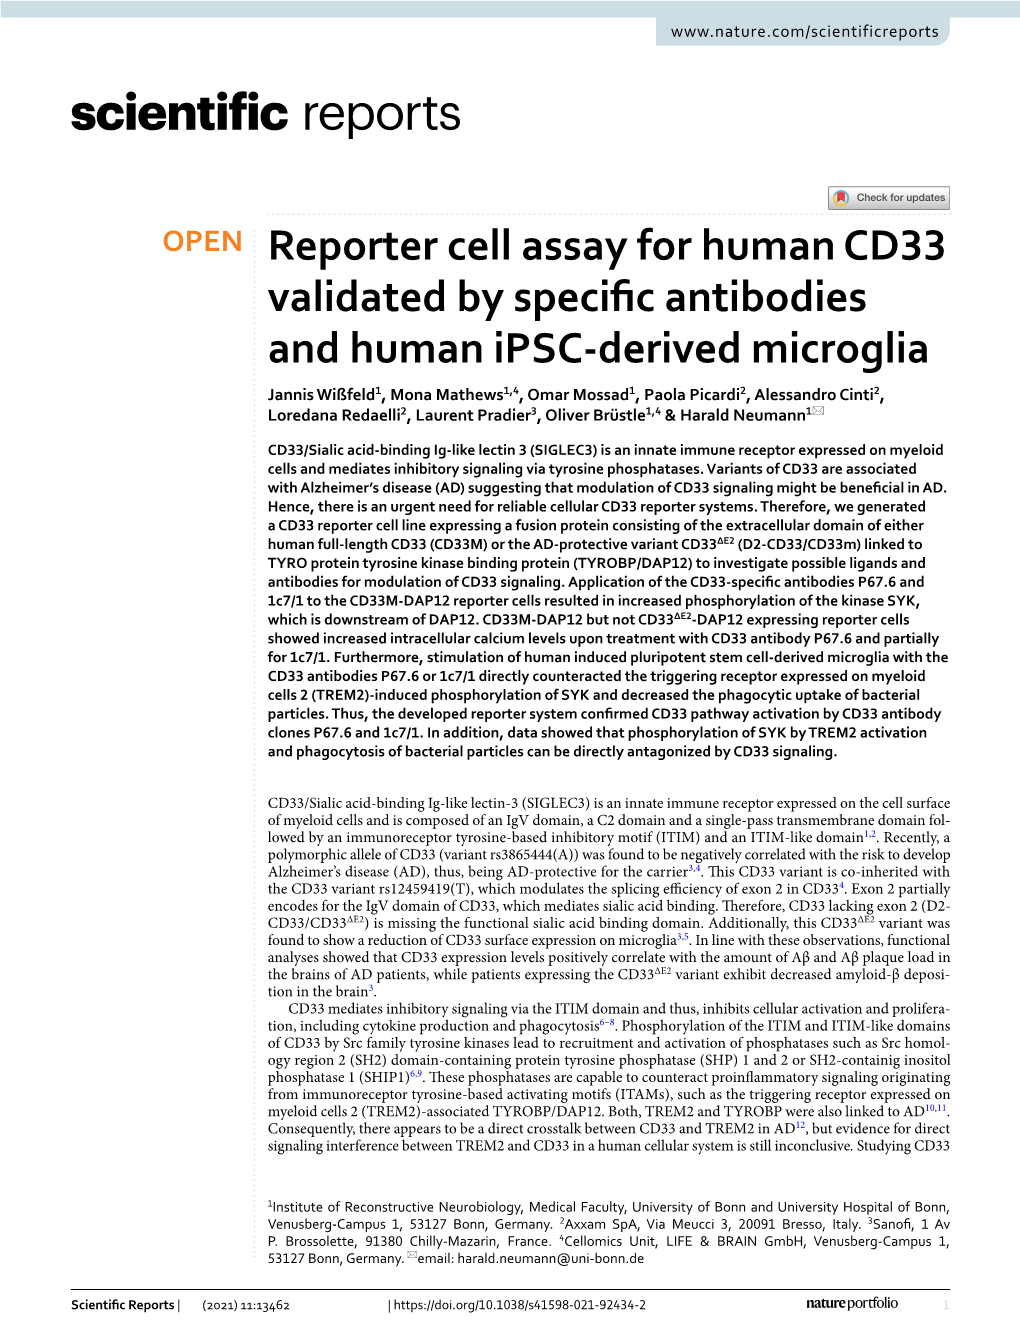 Reporter Cell Assay for Human CD33 Validated by Specific Antibodies And